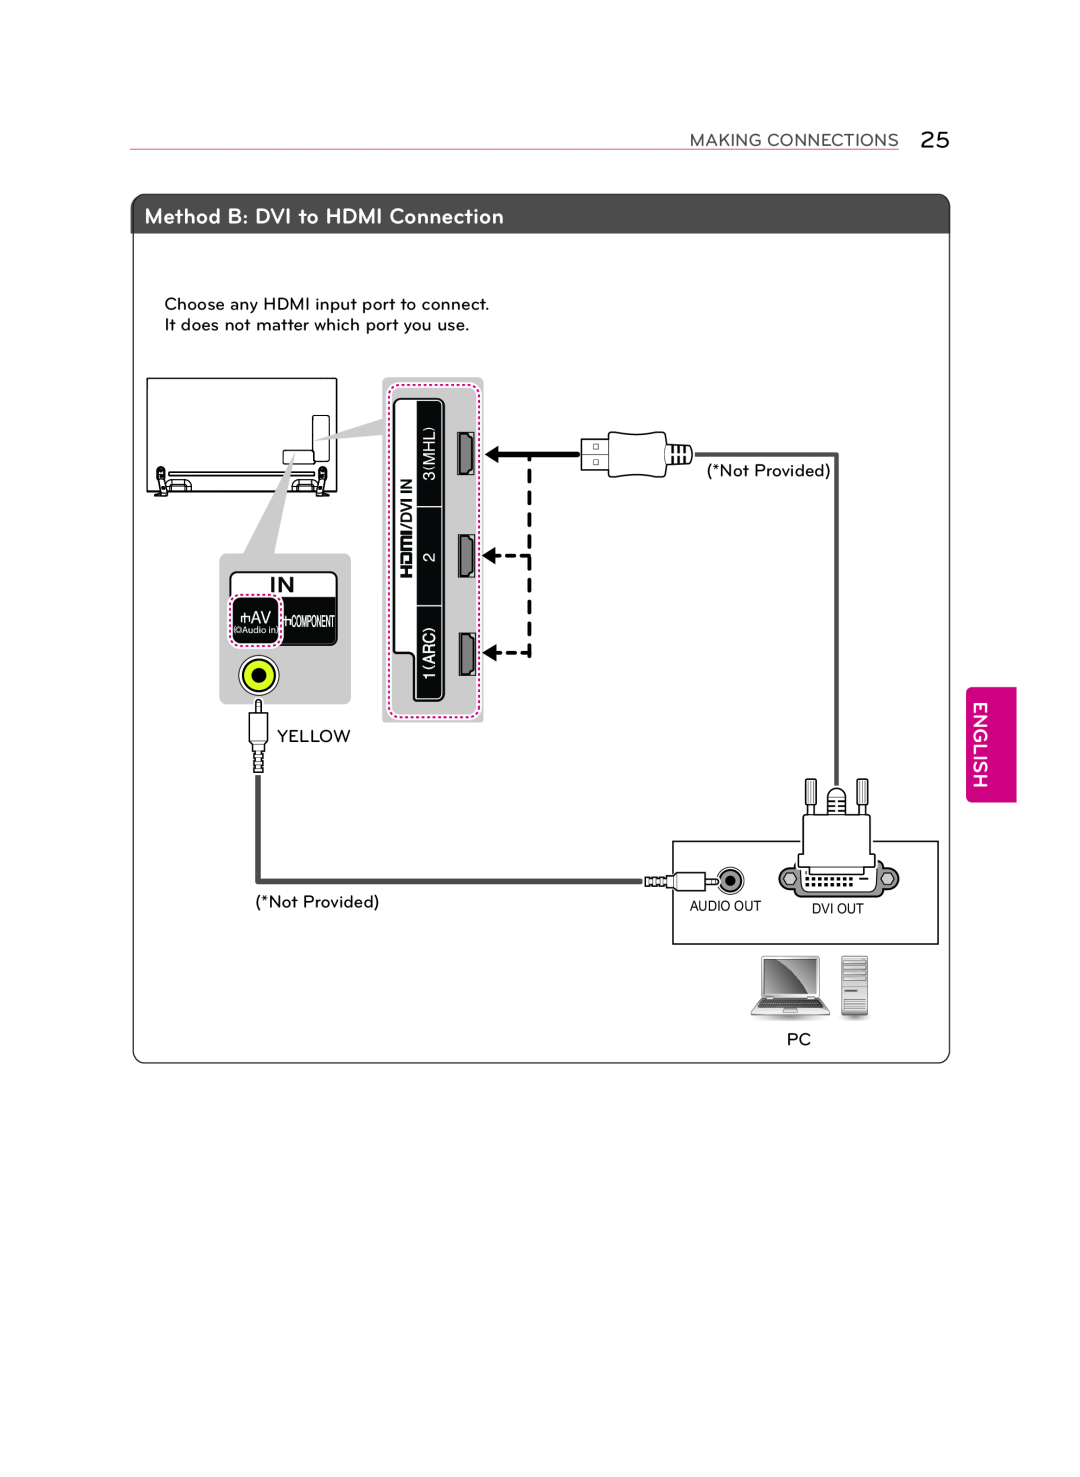 LG Electronics 55LA9650 owner manual Method B DVI to HDMI Connection, English, Making Connections, Audio Out, Dvi Out 